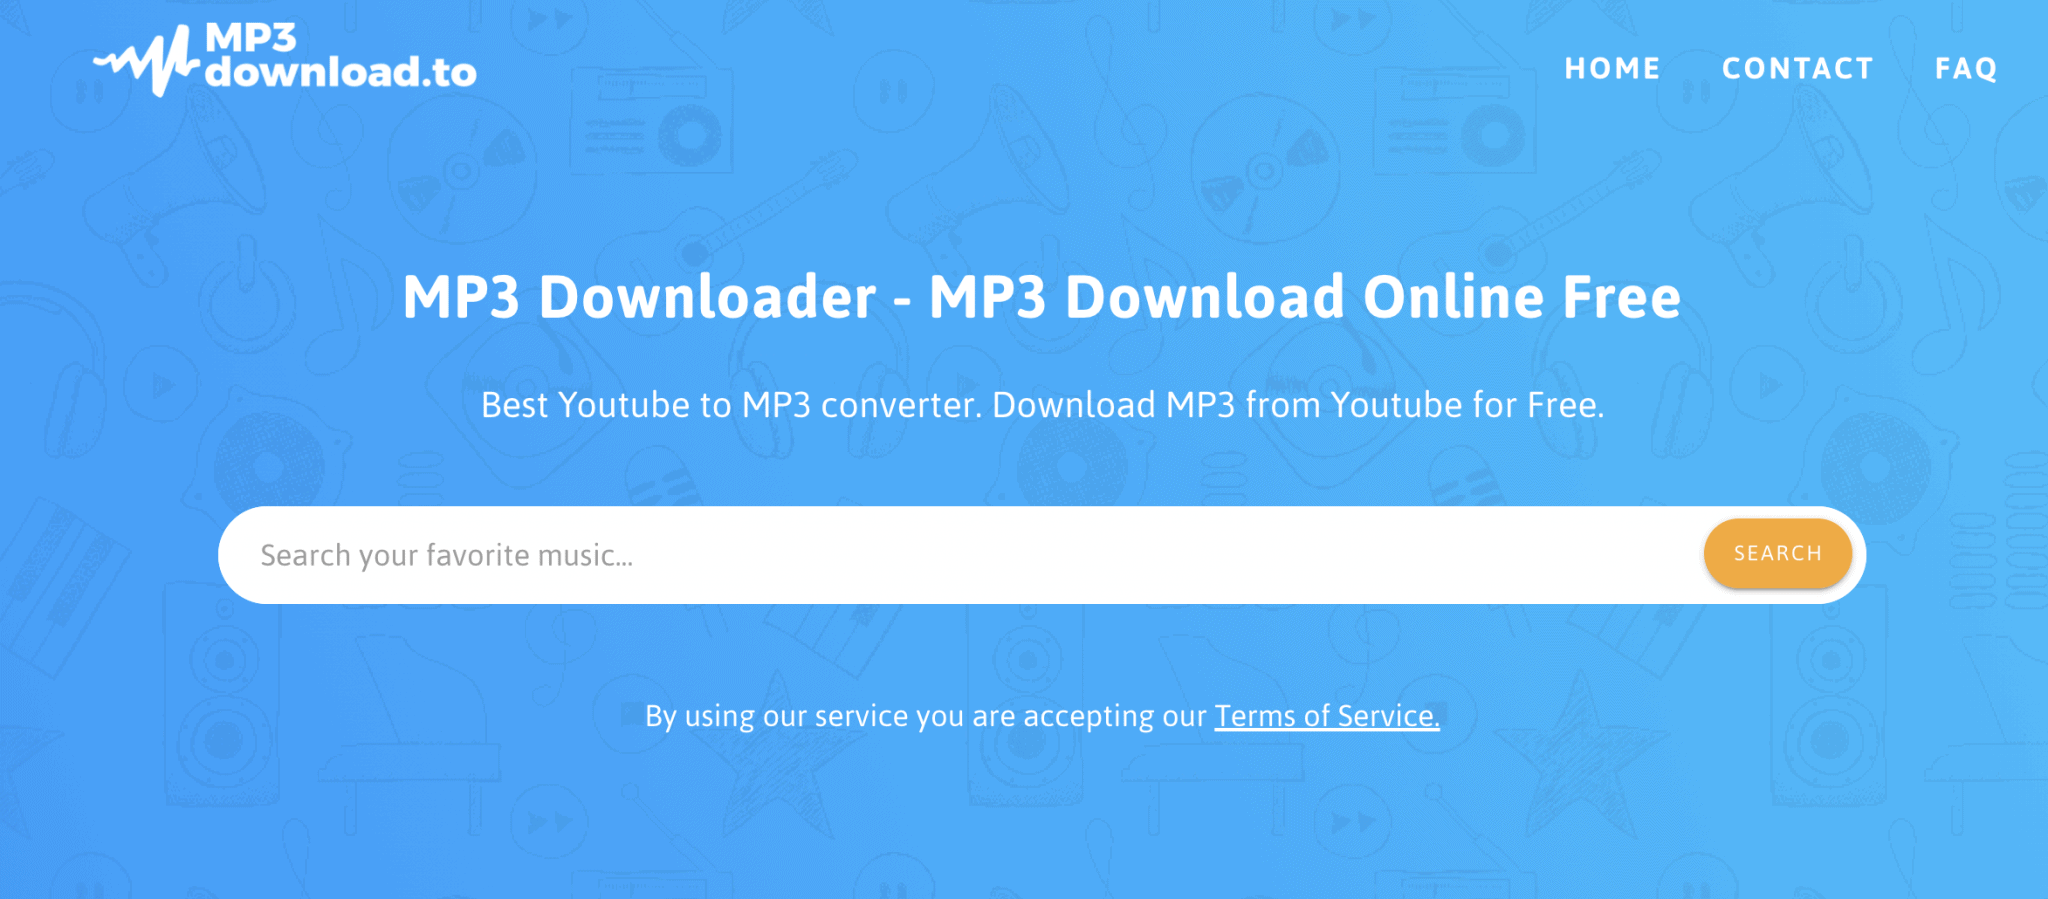 youtube to mp3 converters high bitrate